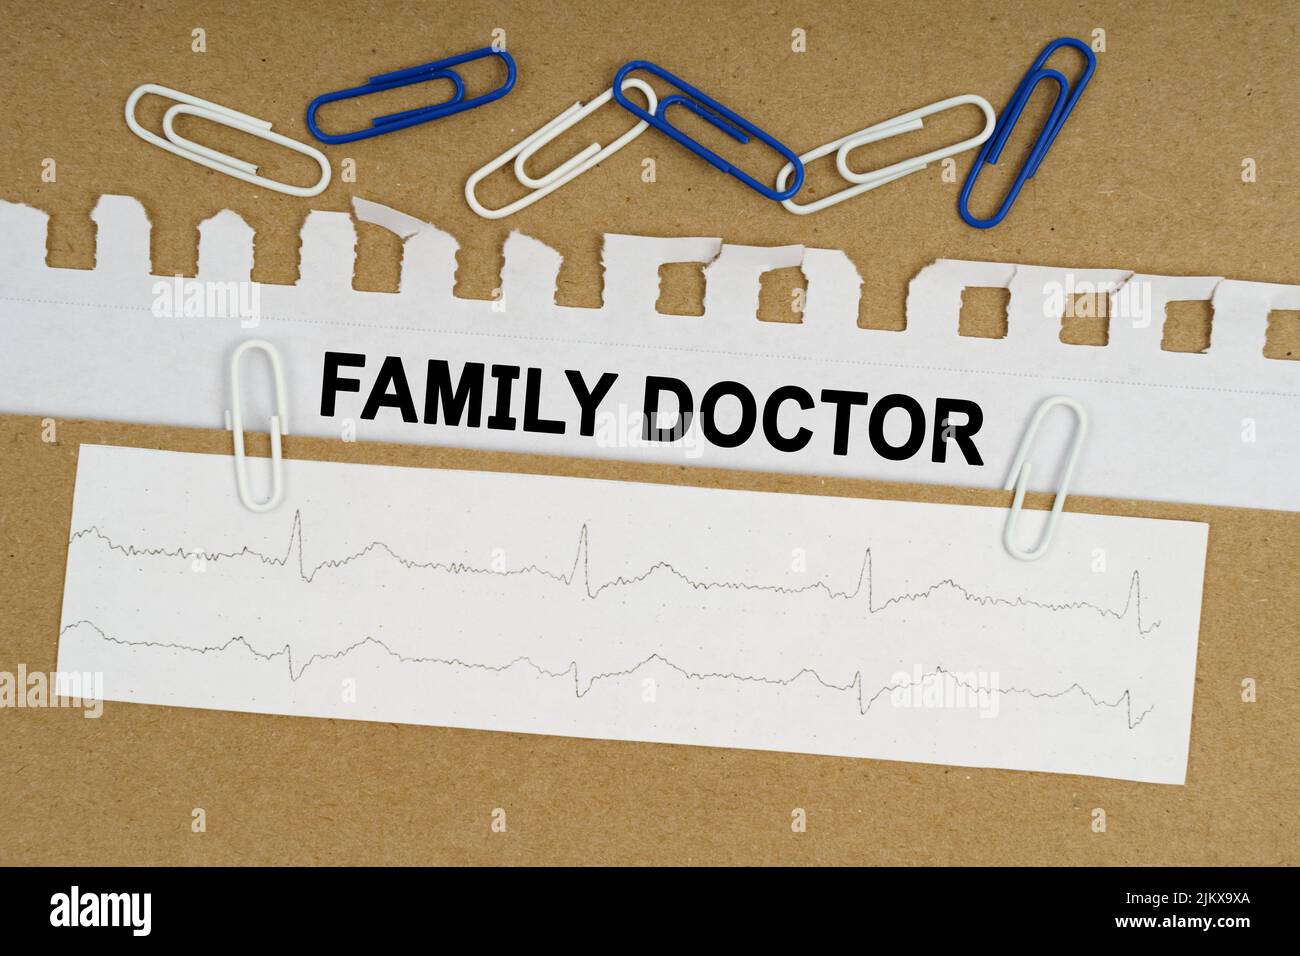 Medicine and health concept. On the table lies a cardiogram, paper clips and paper with the inscription - FAMILY DOCTOR Stock Photo